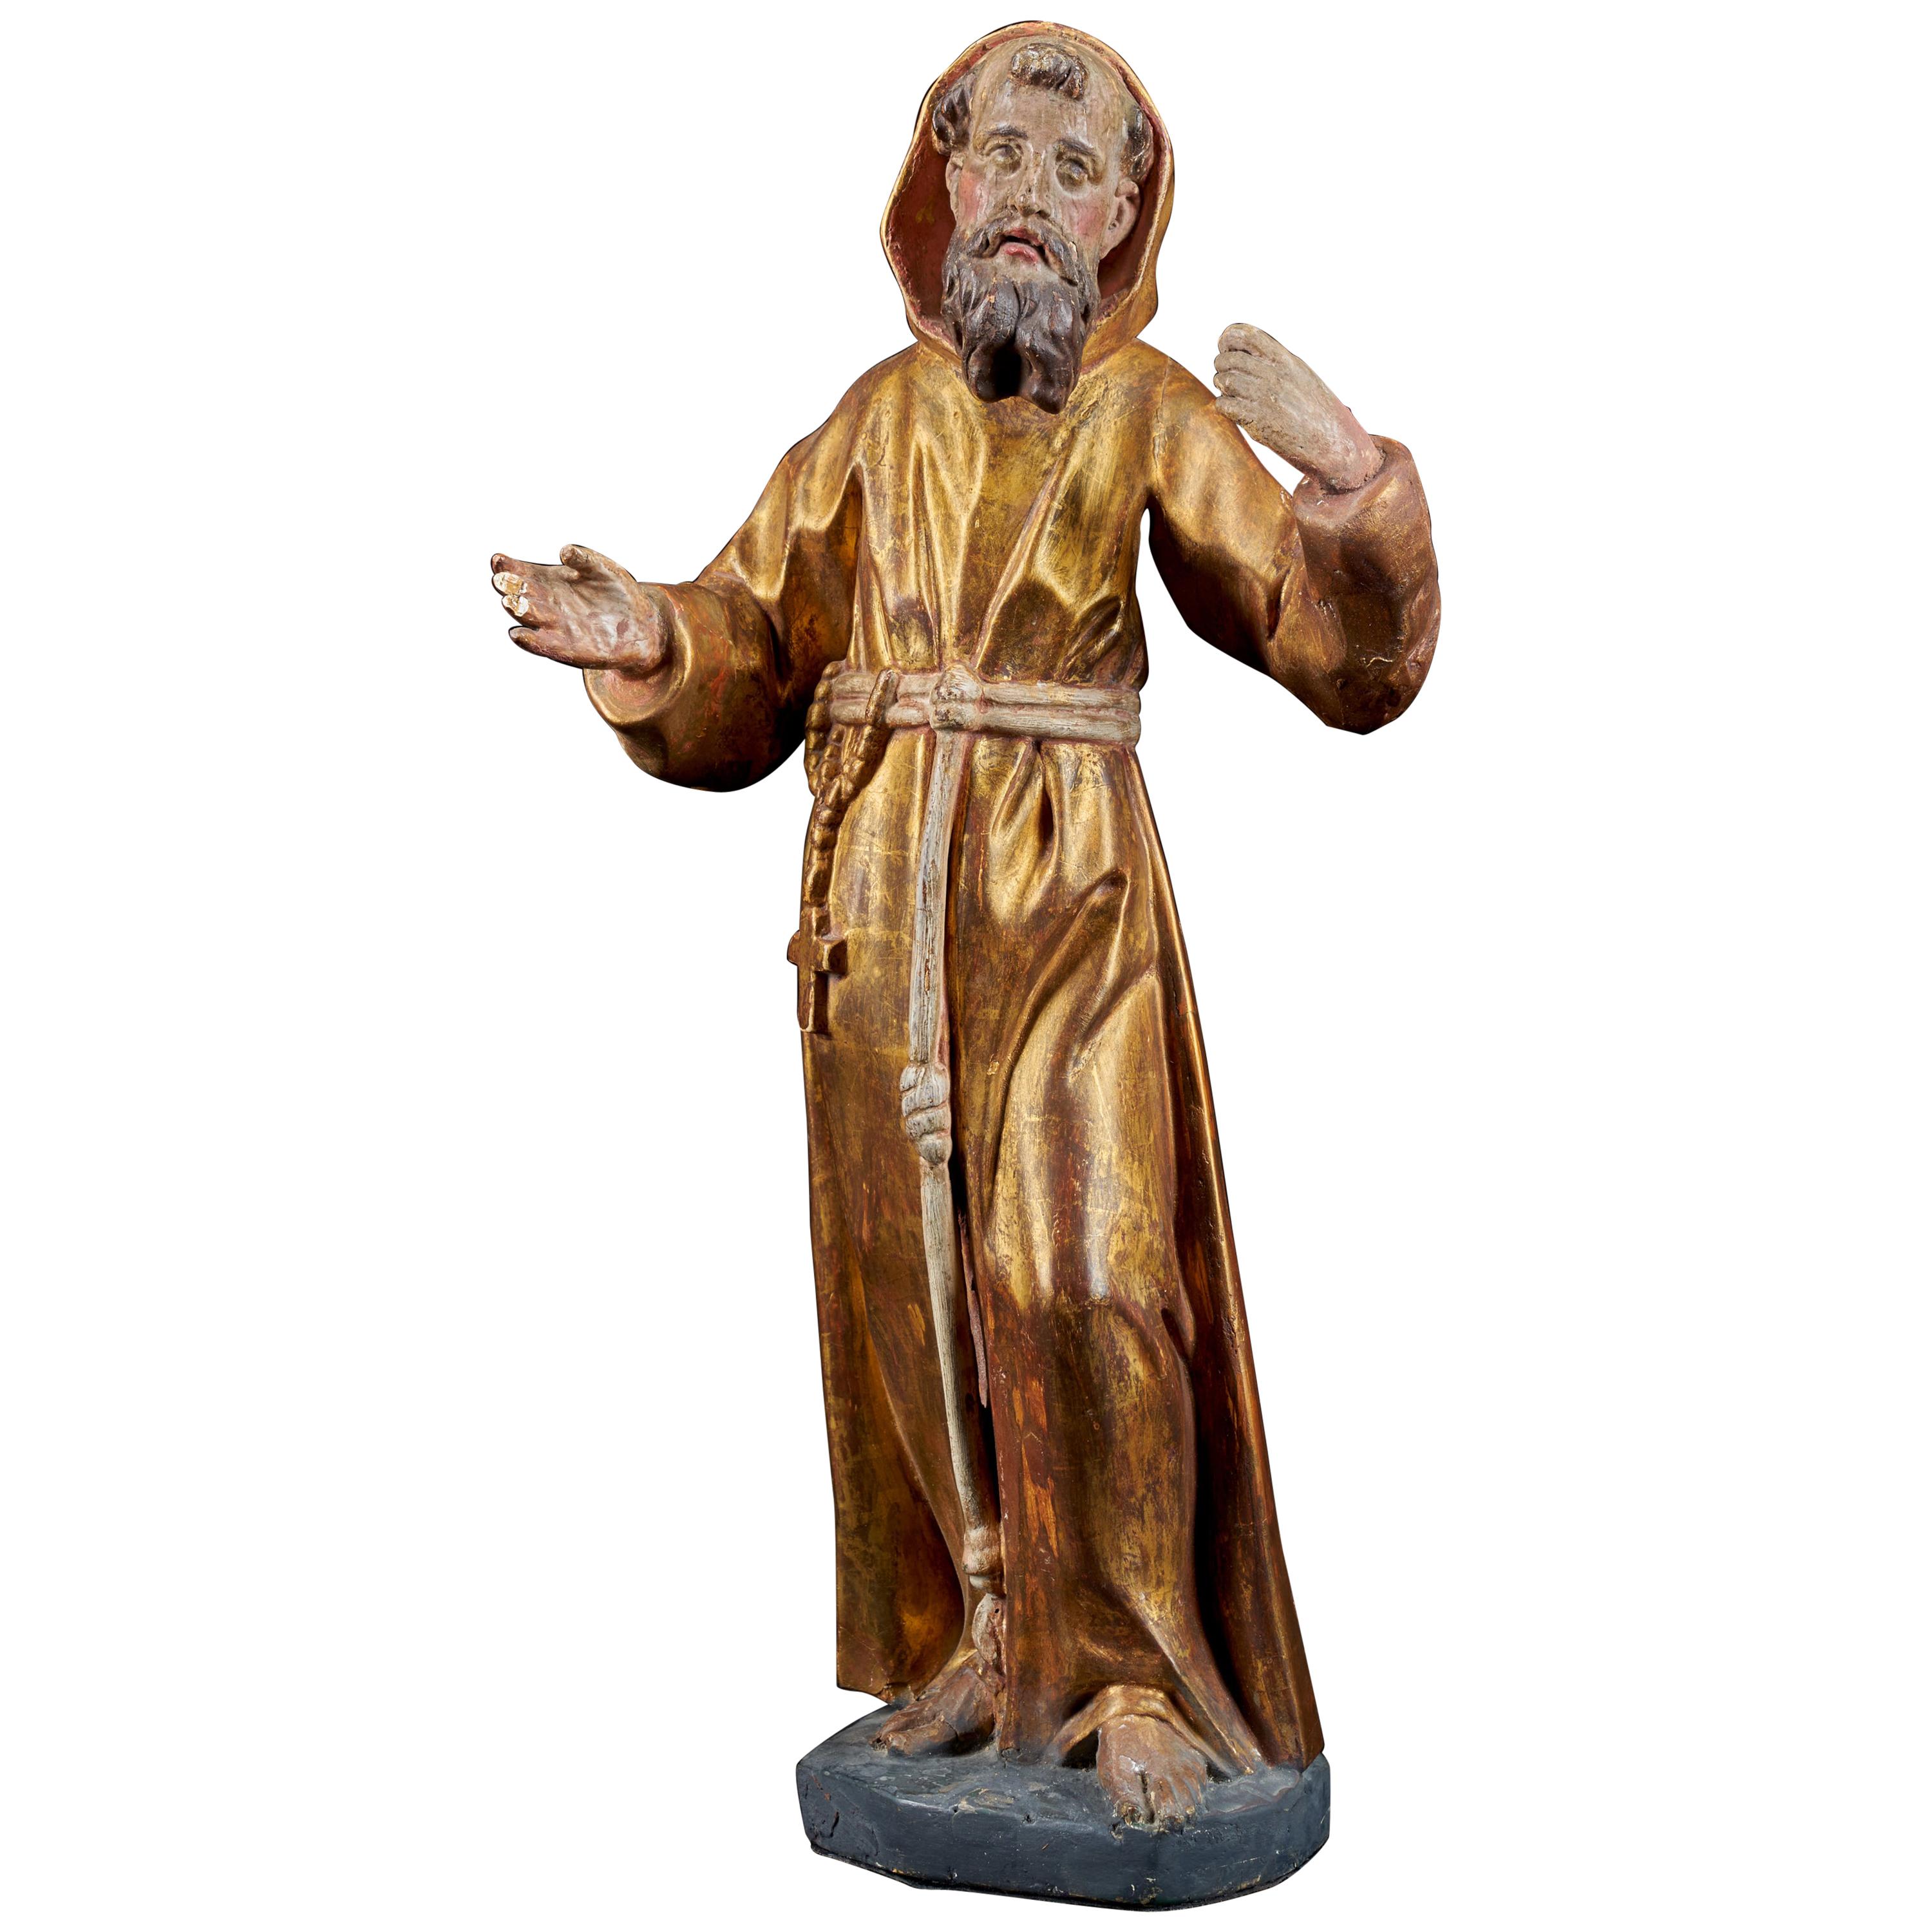 Wooden Statue of Saint-Francis with the Original Polychromy and Gilding